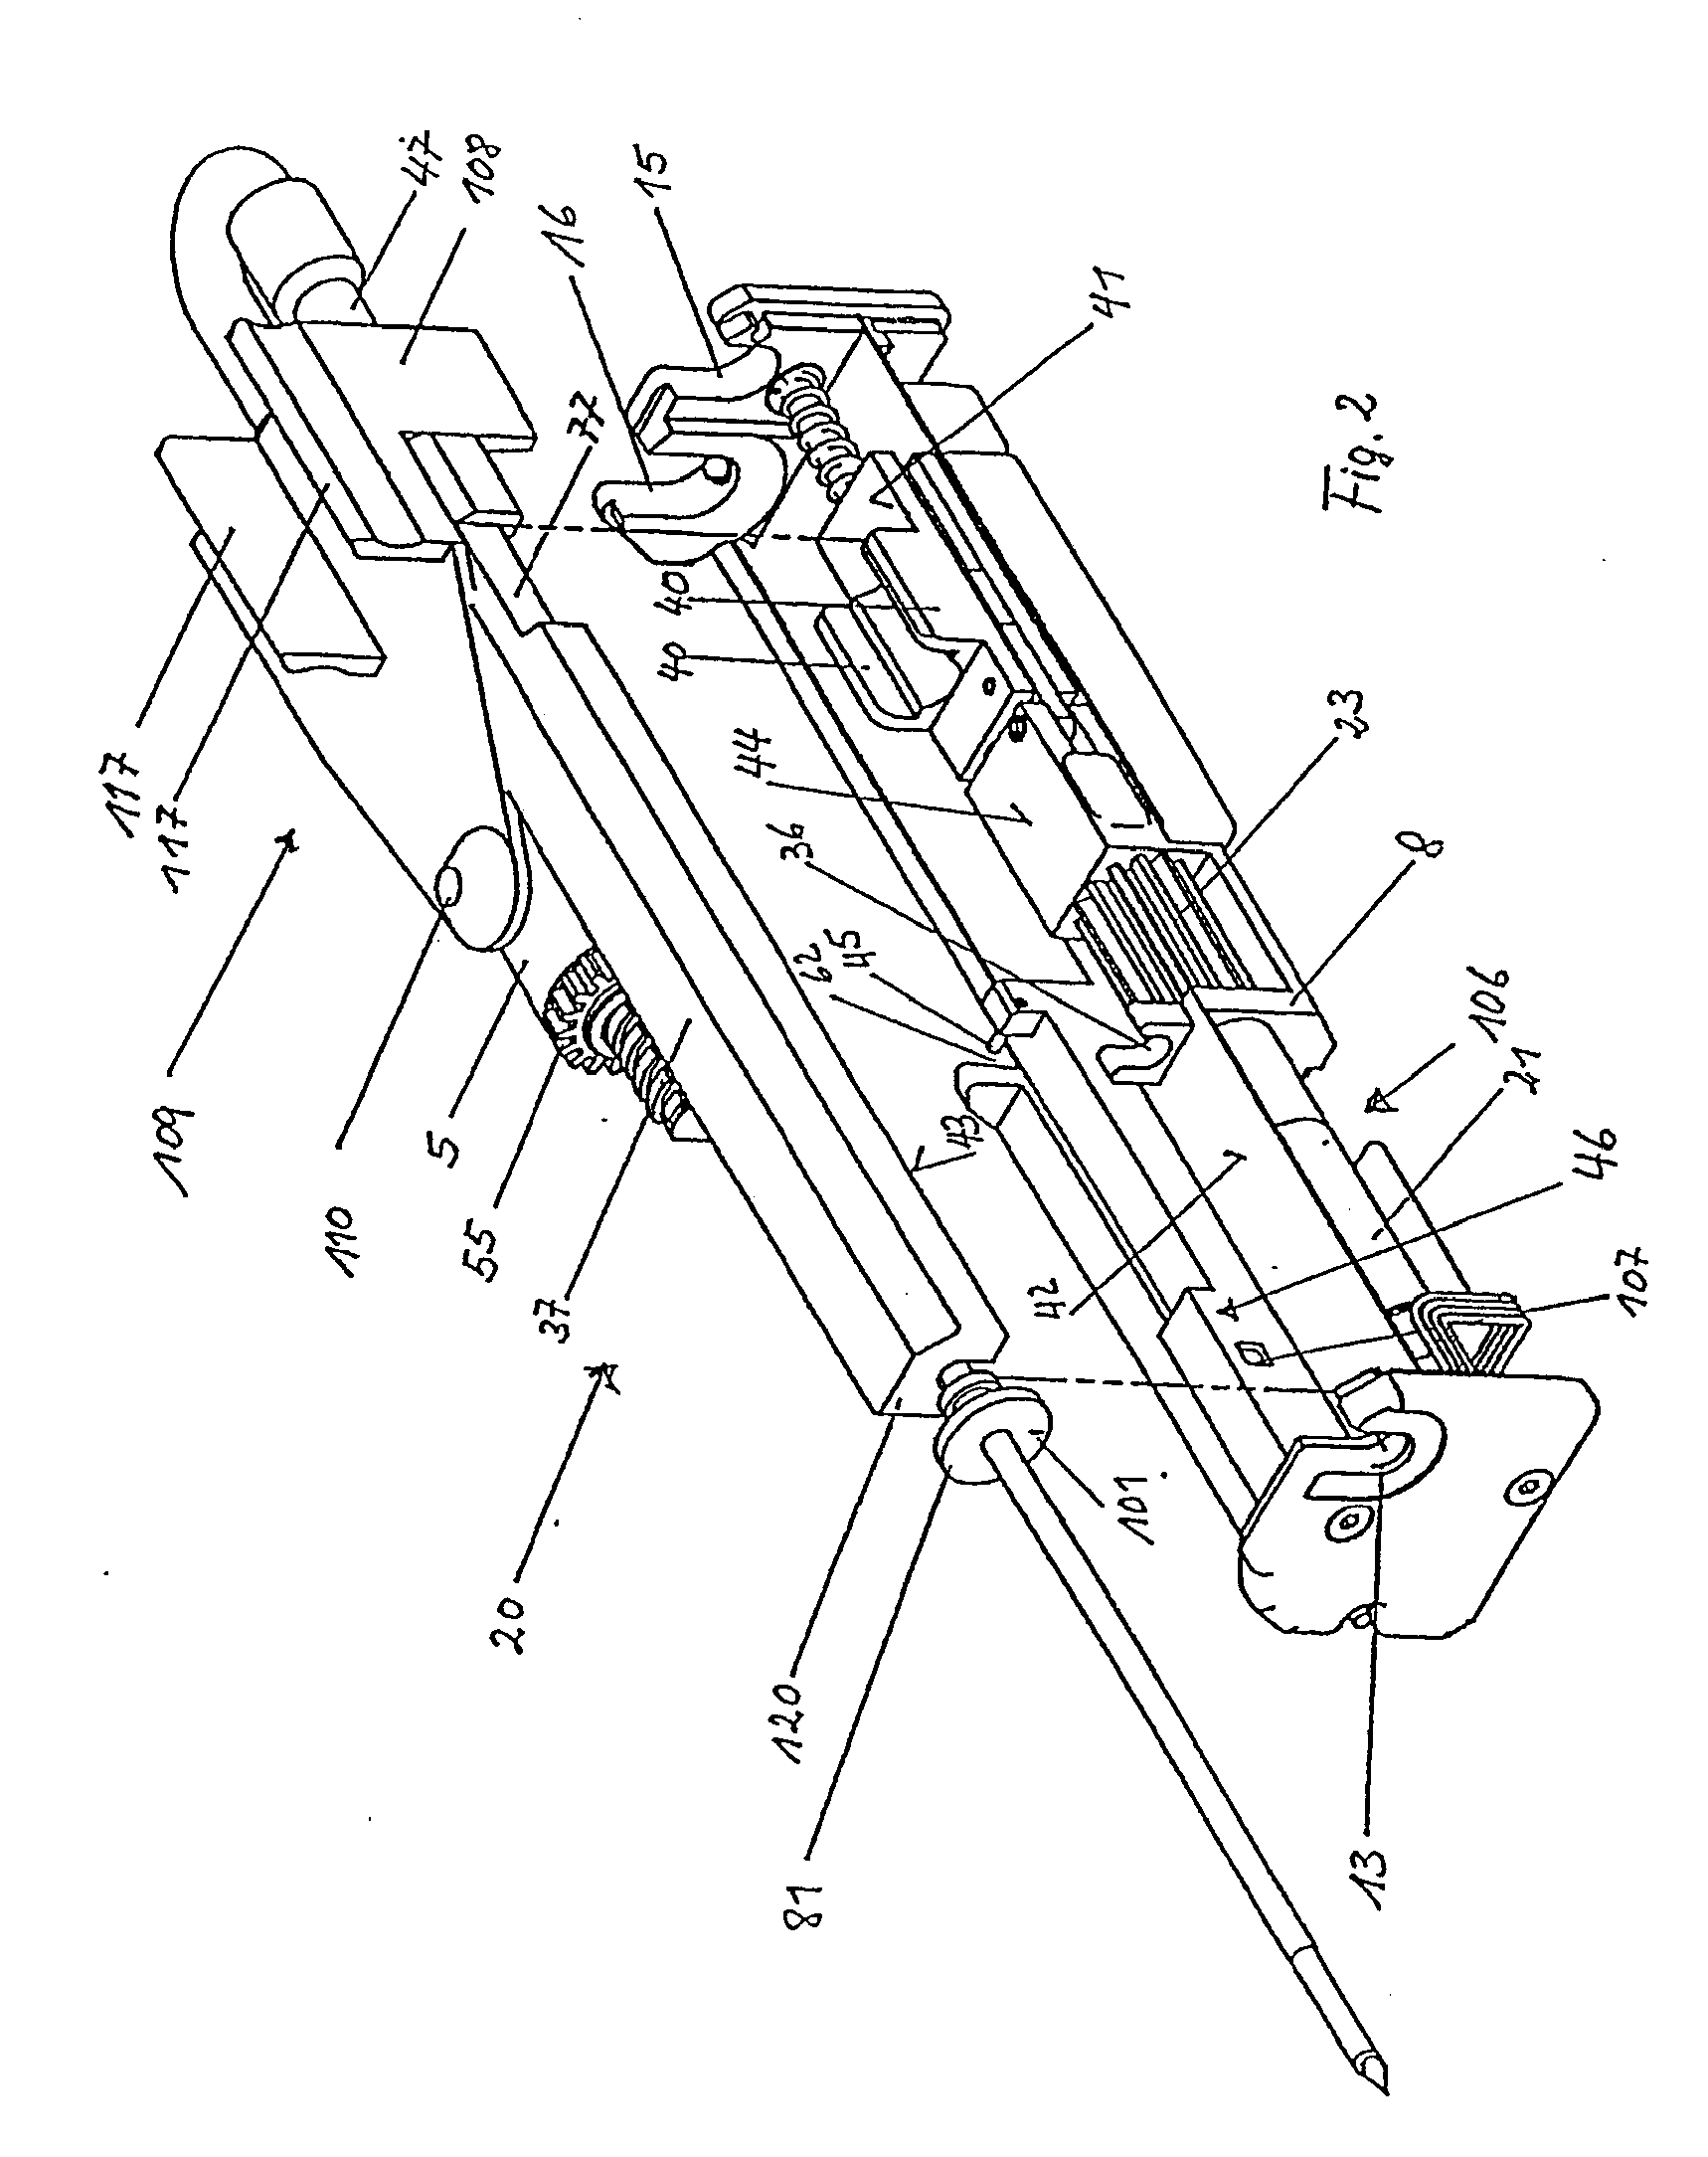 Biopsy device and biopsy needle module that can be inserted into the biopsy device